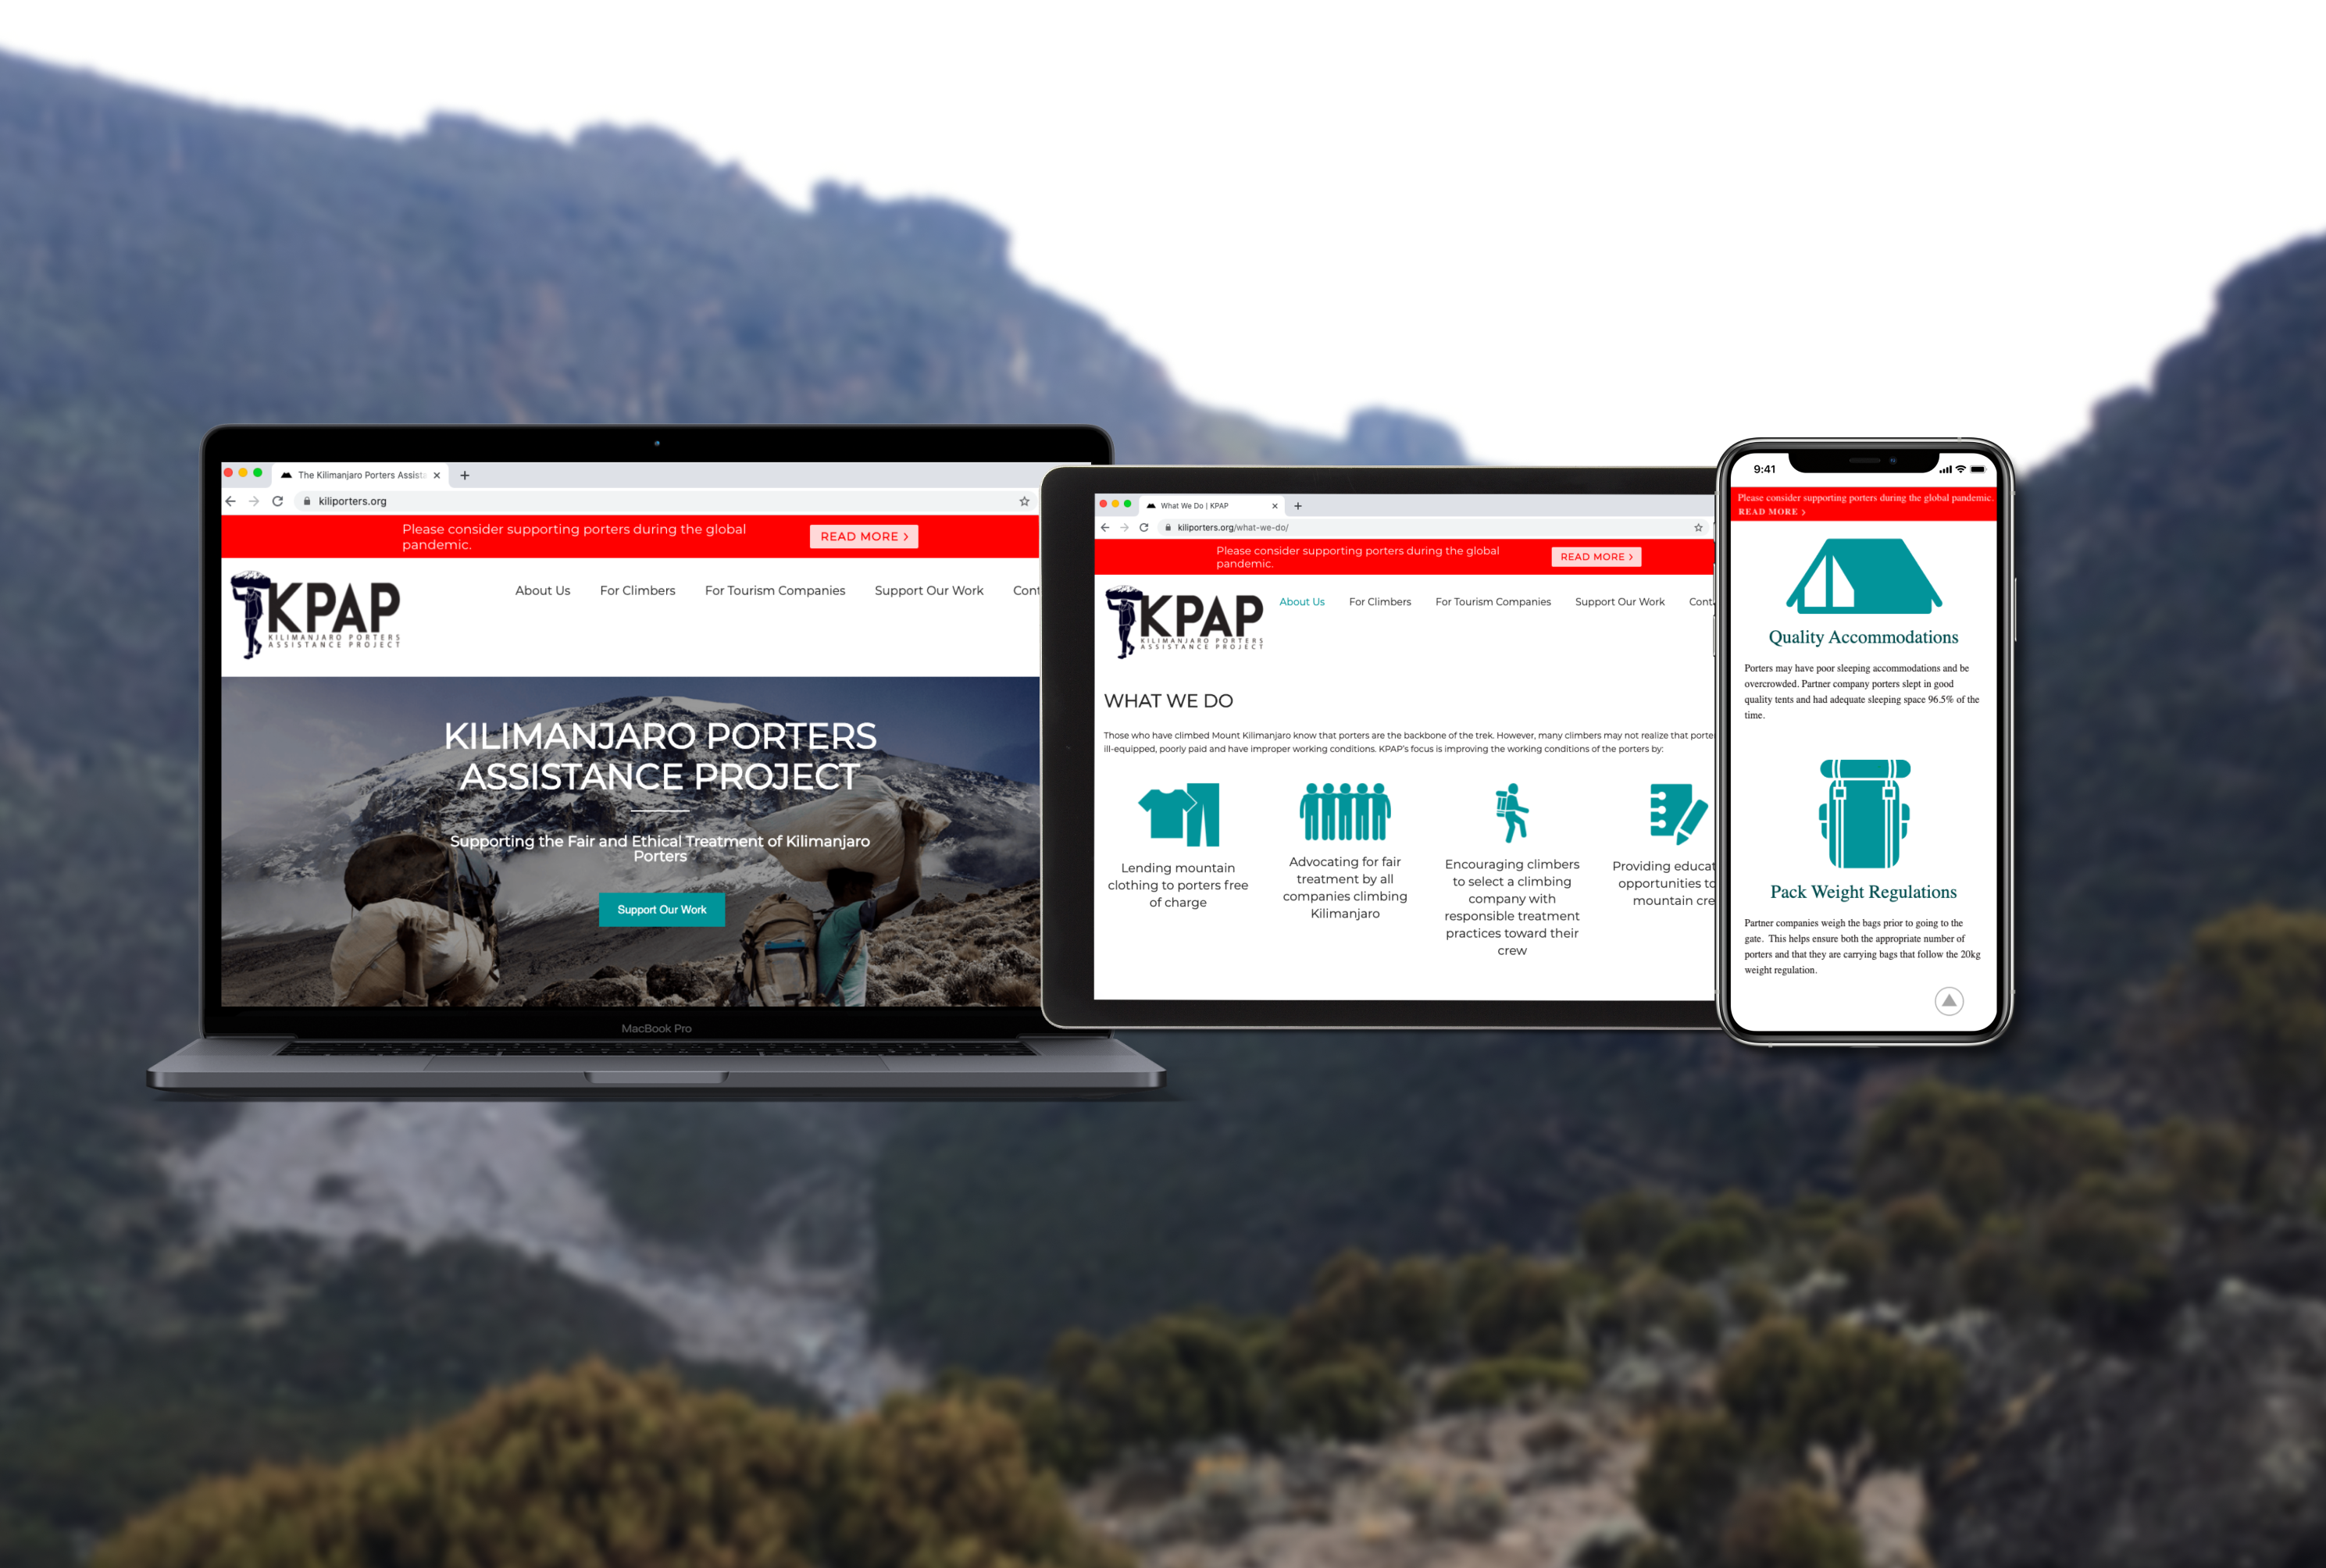 Examples of the new KPAP site across desktop, tablet and mobile. The screens are superimposed on top of a blurred background image of Mount Kilimanjaro